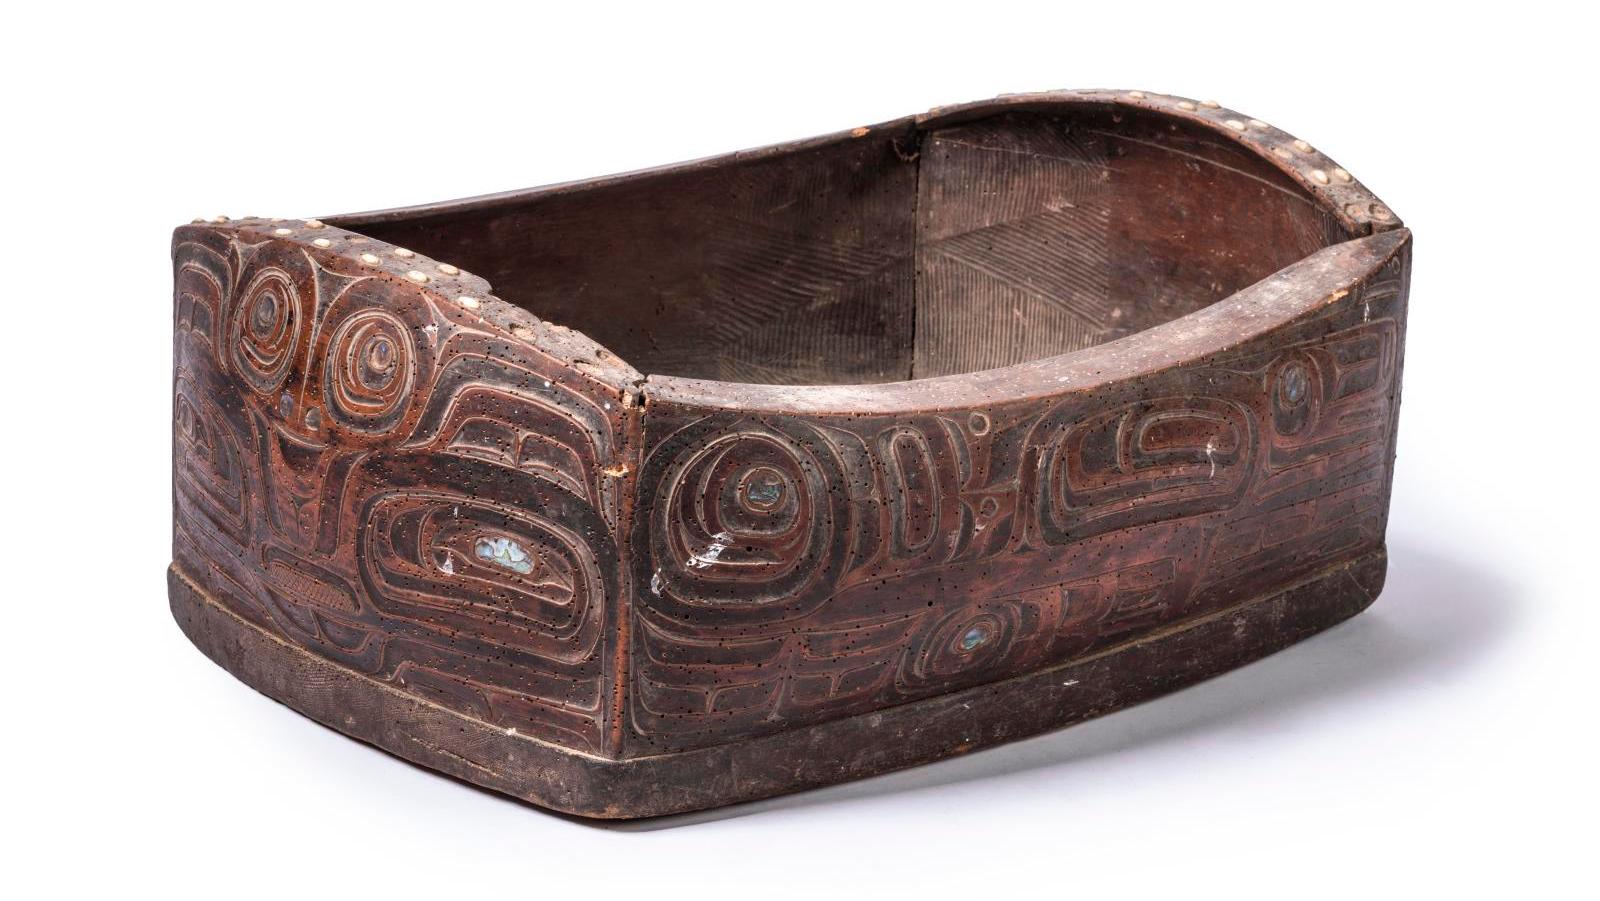 Tsimshian or Haida, late 18th/early 19th century. Ceremonial bowl with sea bear,... Vibrant Memories of an Expedition to Alaska